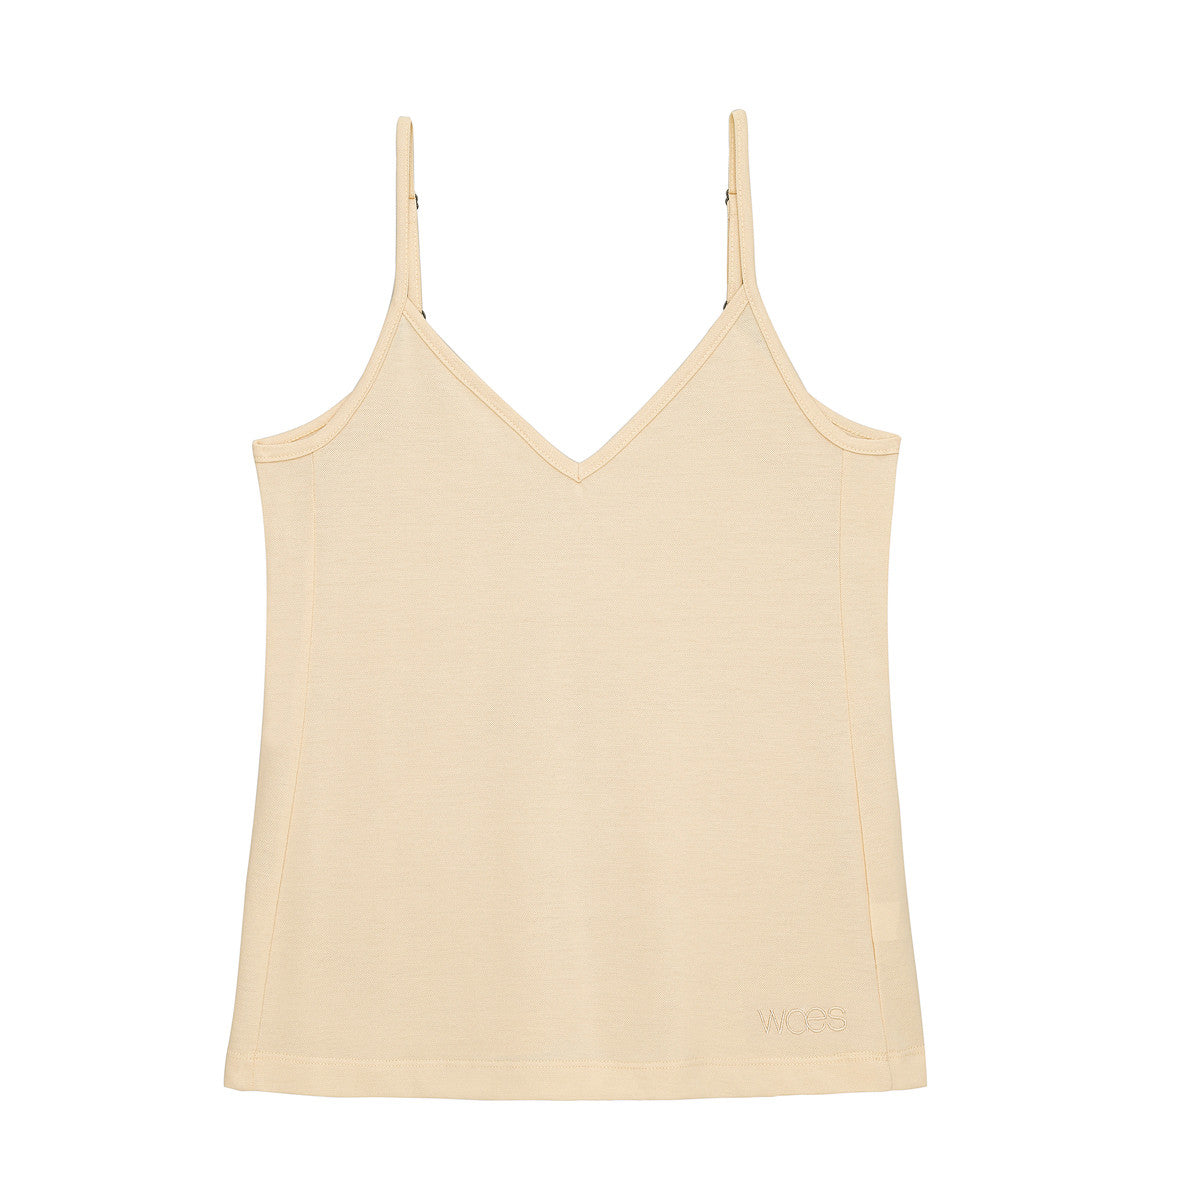 This Little Hedonist beige camisole is our essential cami top, made from the softest piquet cotton. Made from organic cotton.